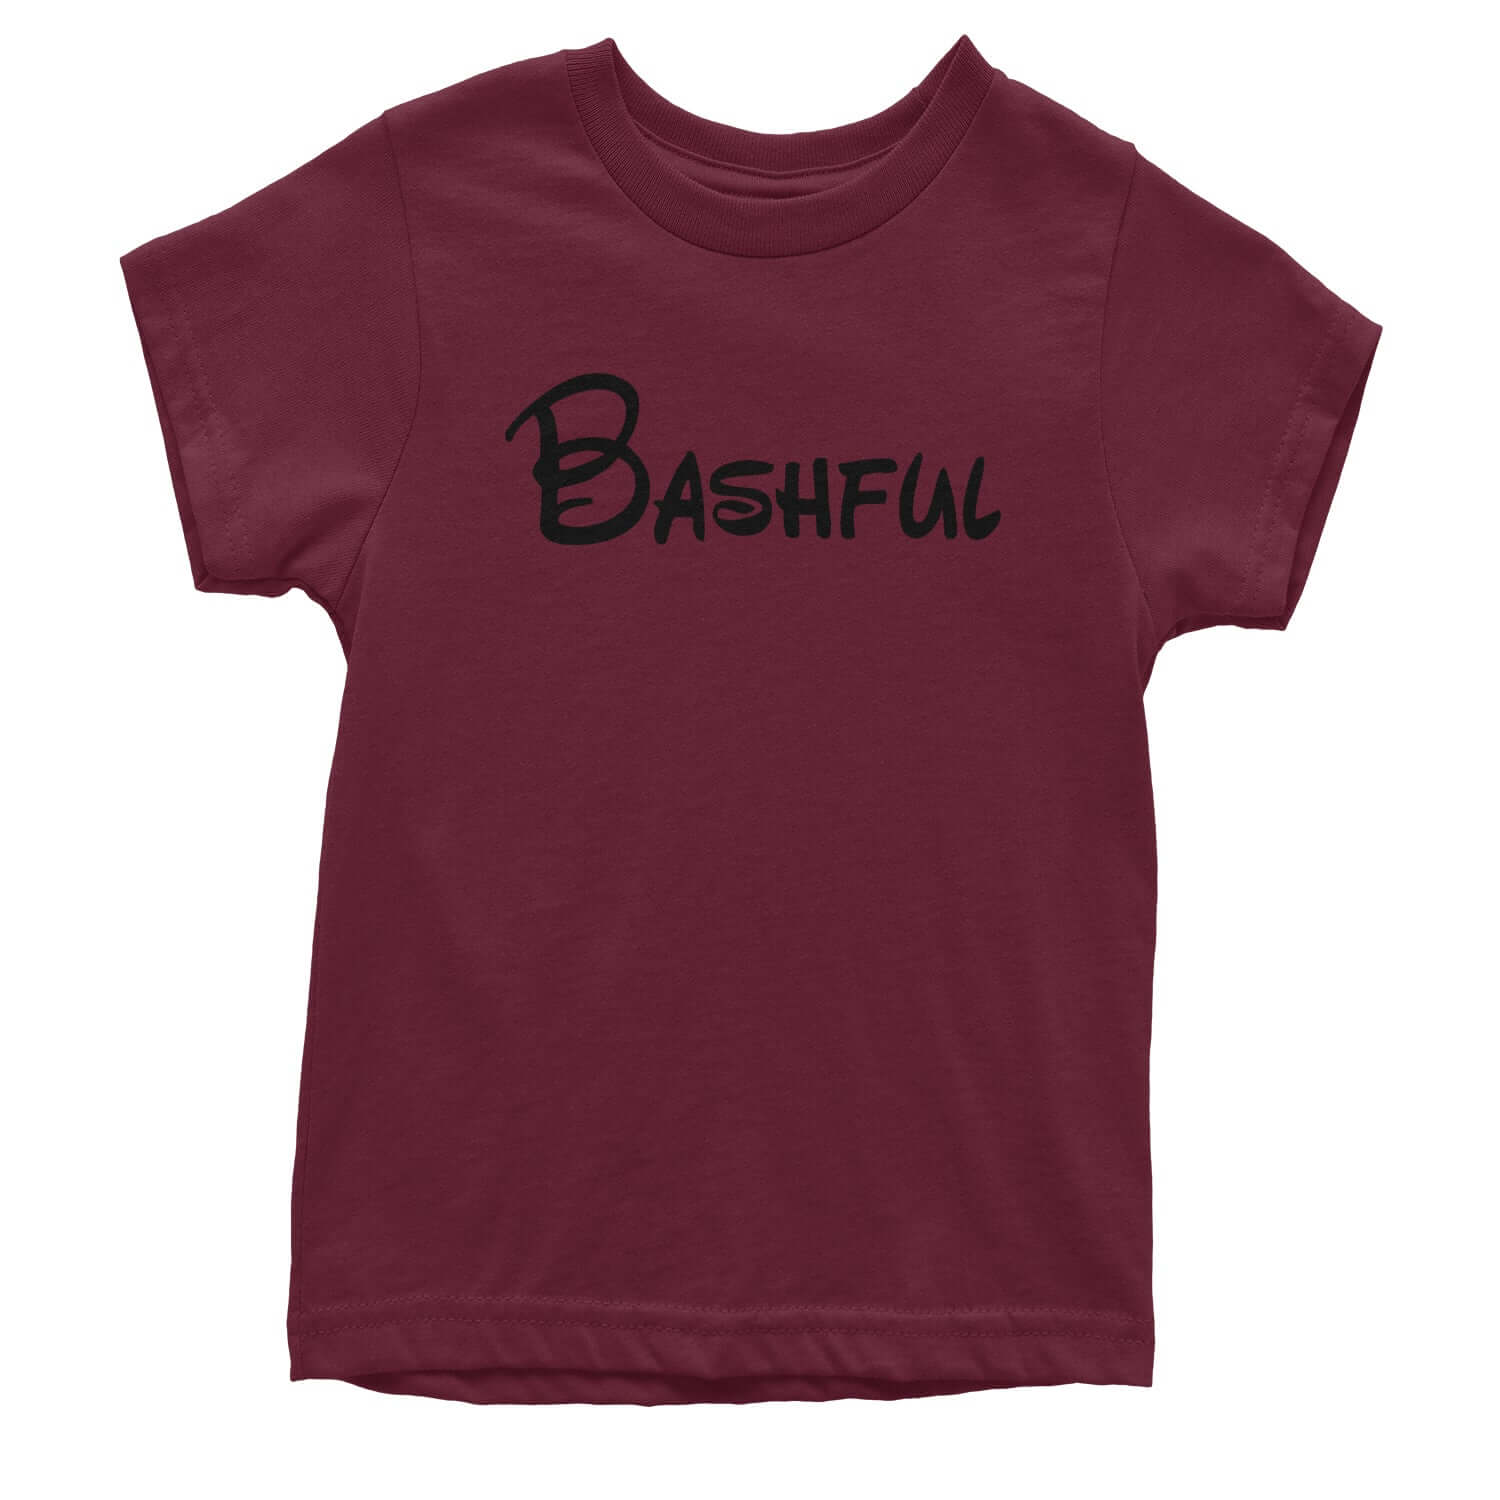 Bashful - 7 Dwarfs Costume Youth T-shirt and, costume, dwarfs, group, halloween, matching, seven, snow, the, white by Expression Tees